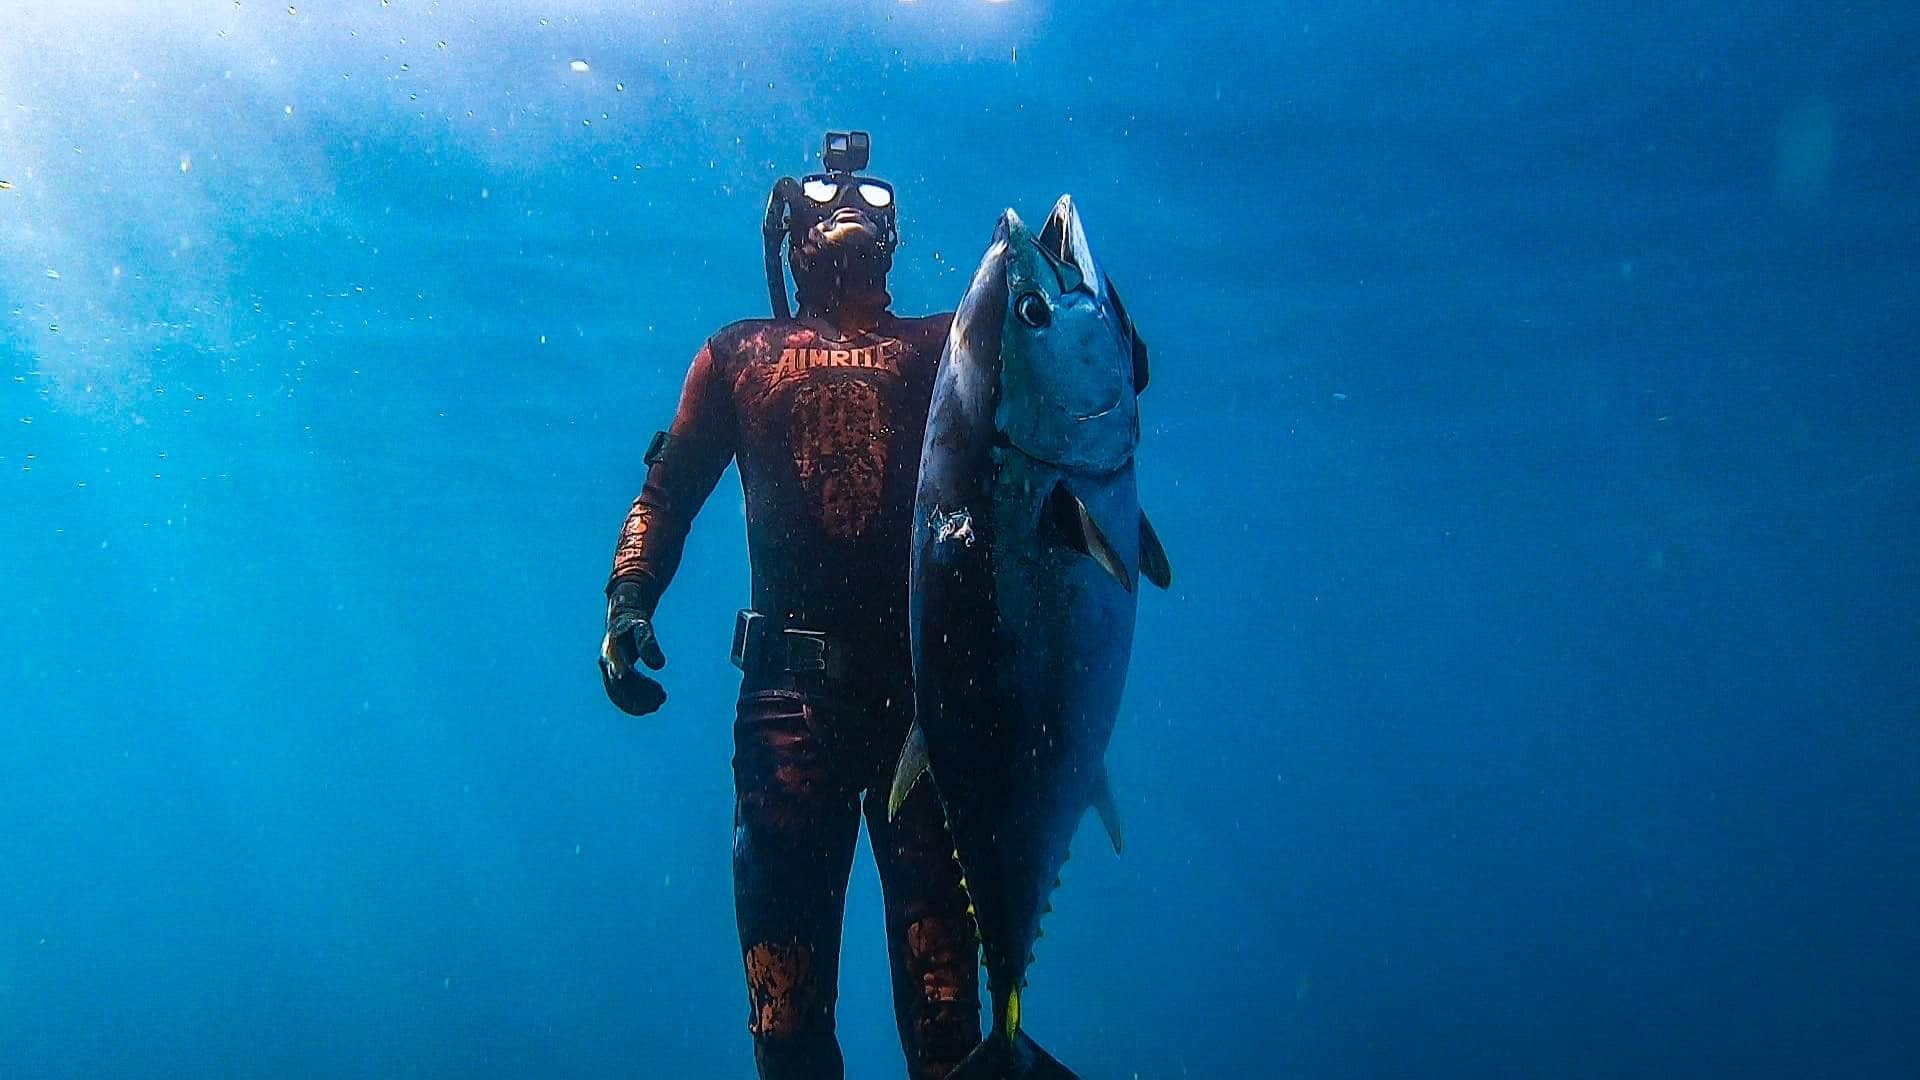 Spearfishing in New Zealand - The Fishing Website